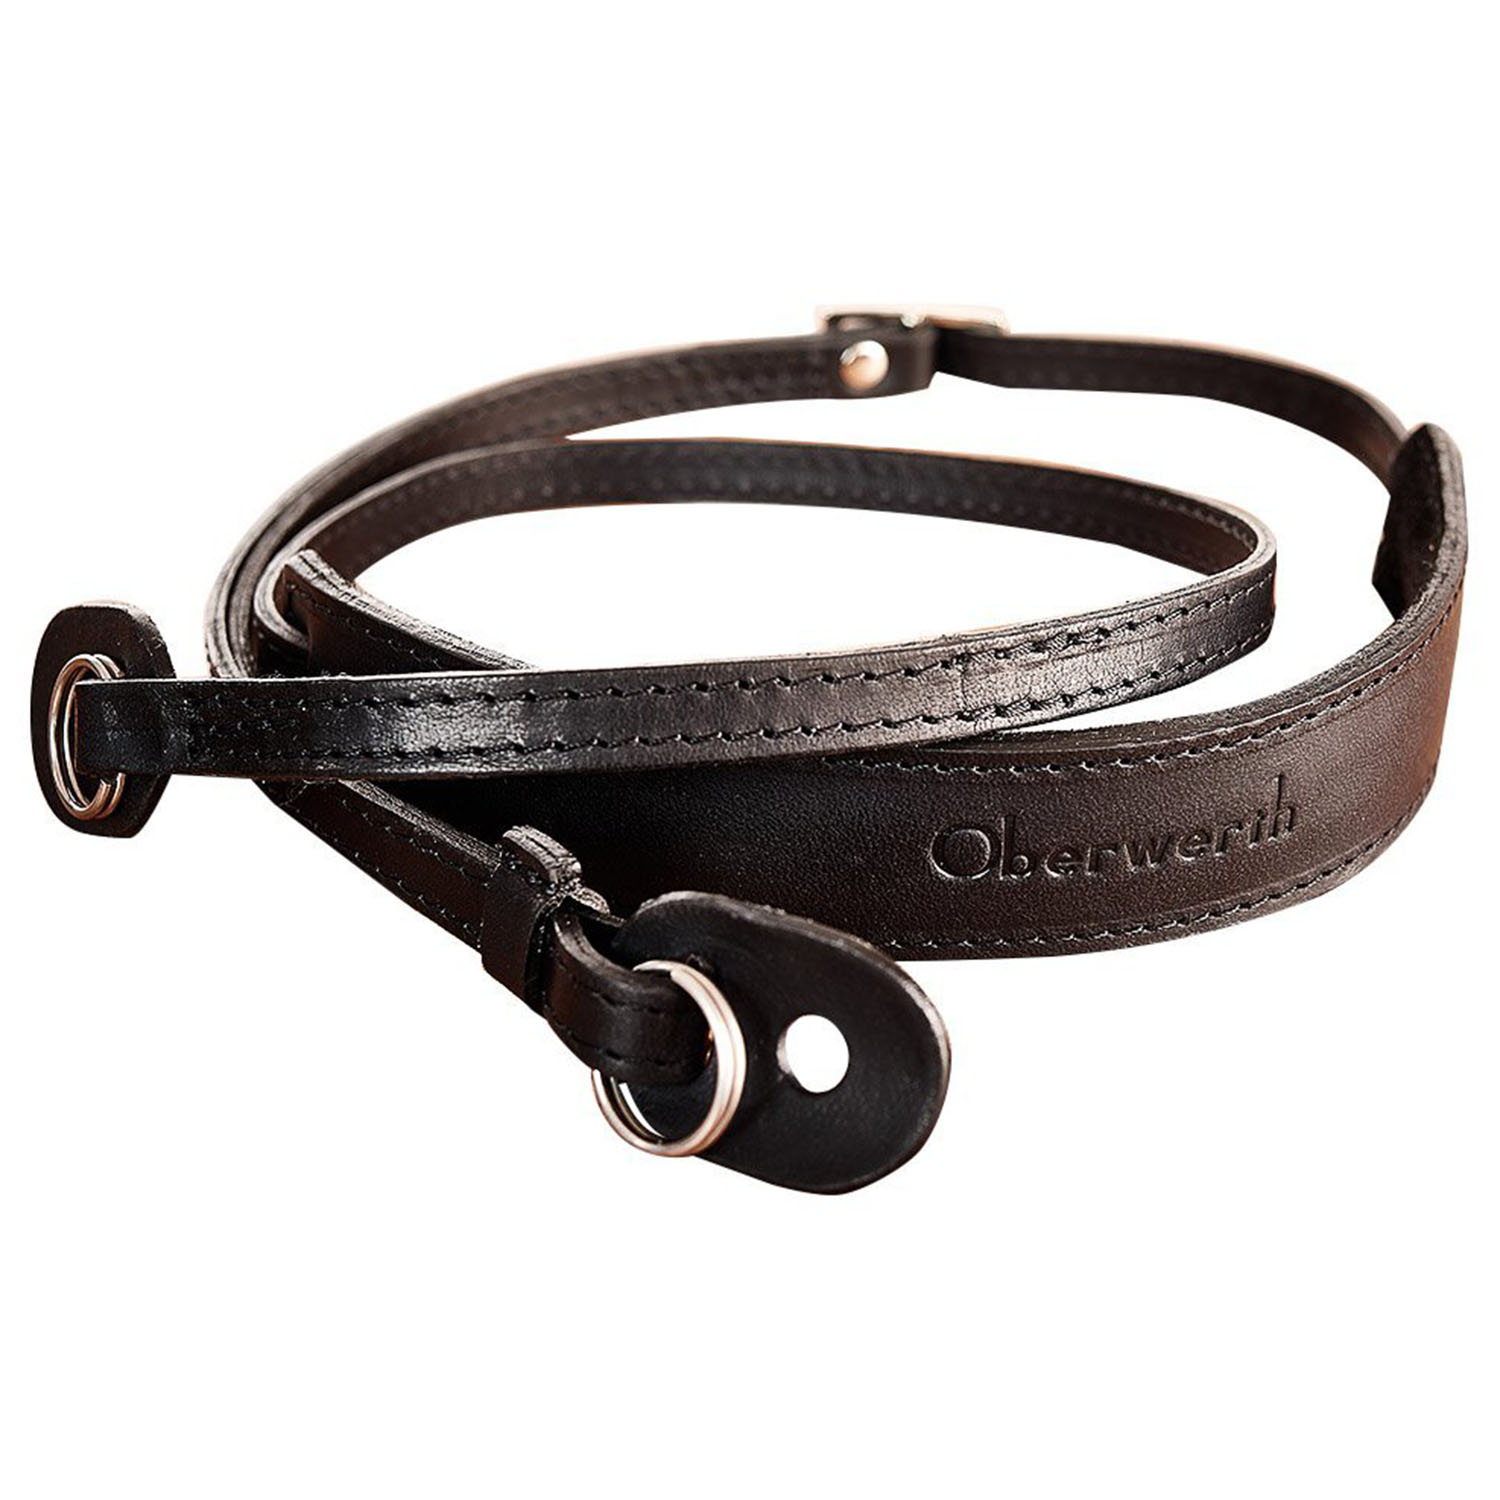 Oberwerth Mosel Cow-Hide Black Leather Strap